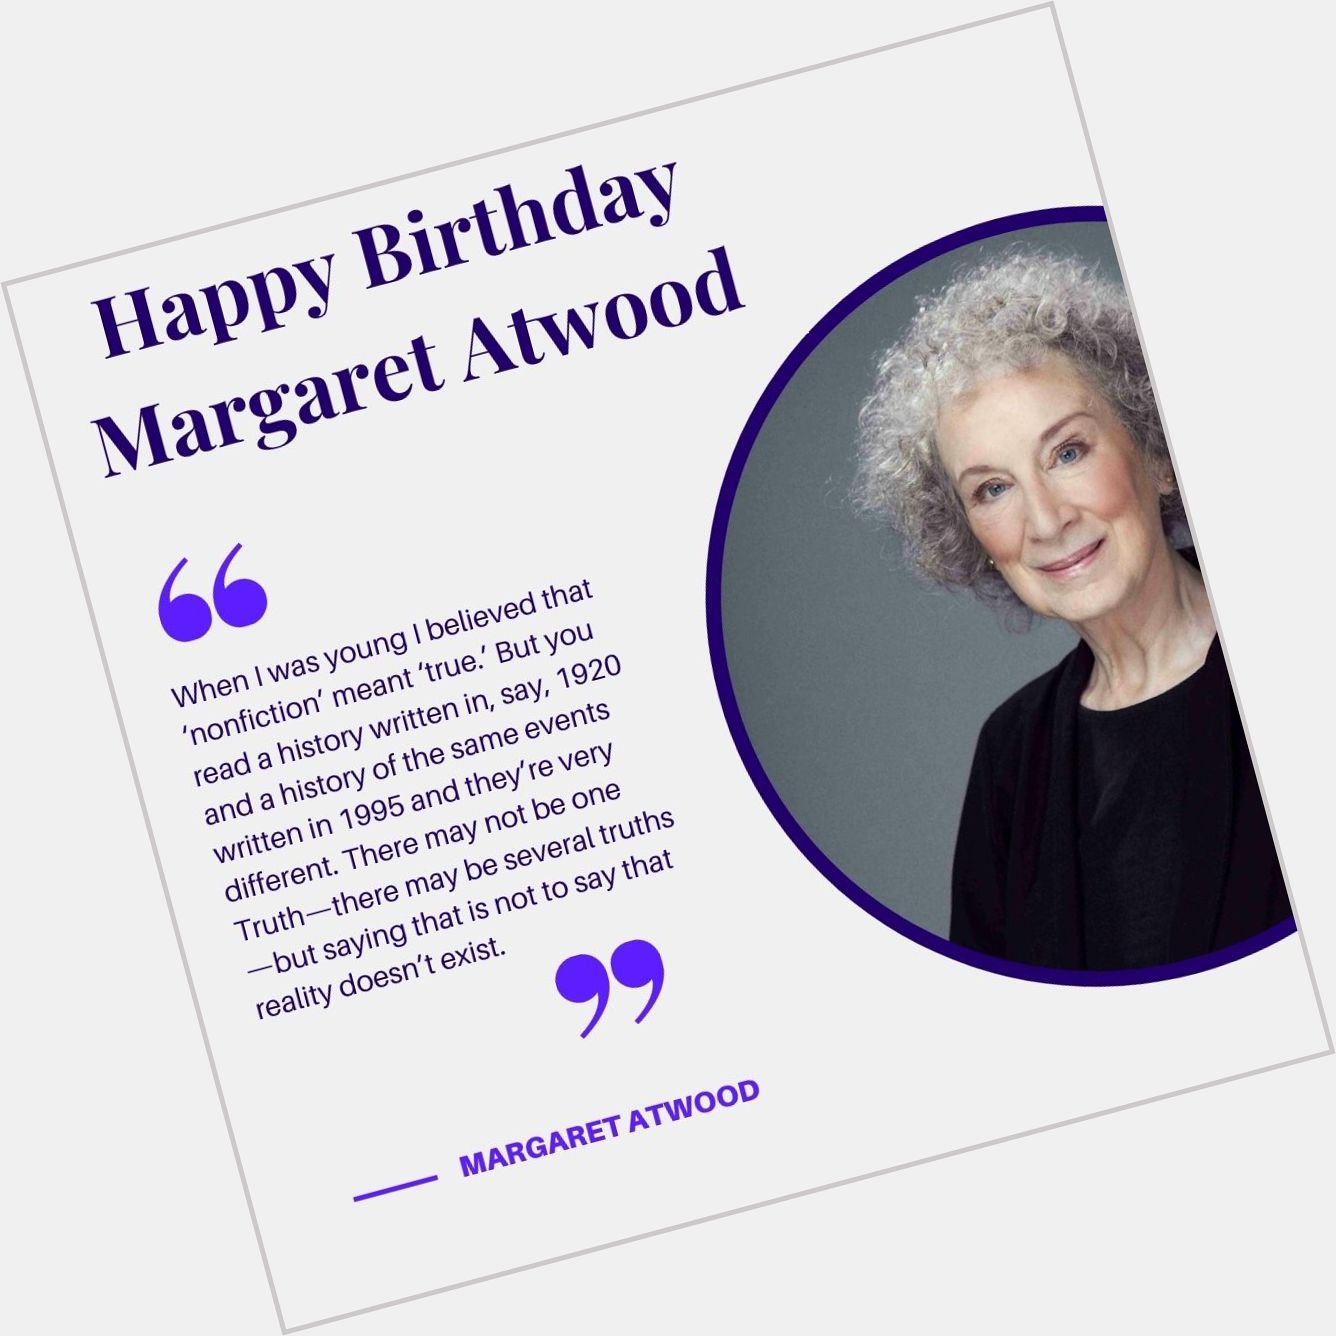 Happy Birthday Margaret Atwood the Canadian poet and novelist famous for The Handmaids Tale and The Testaments 